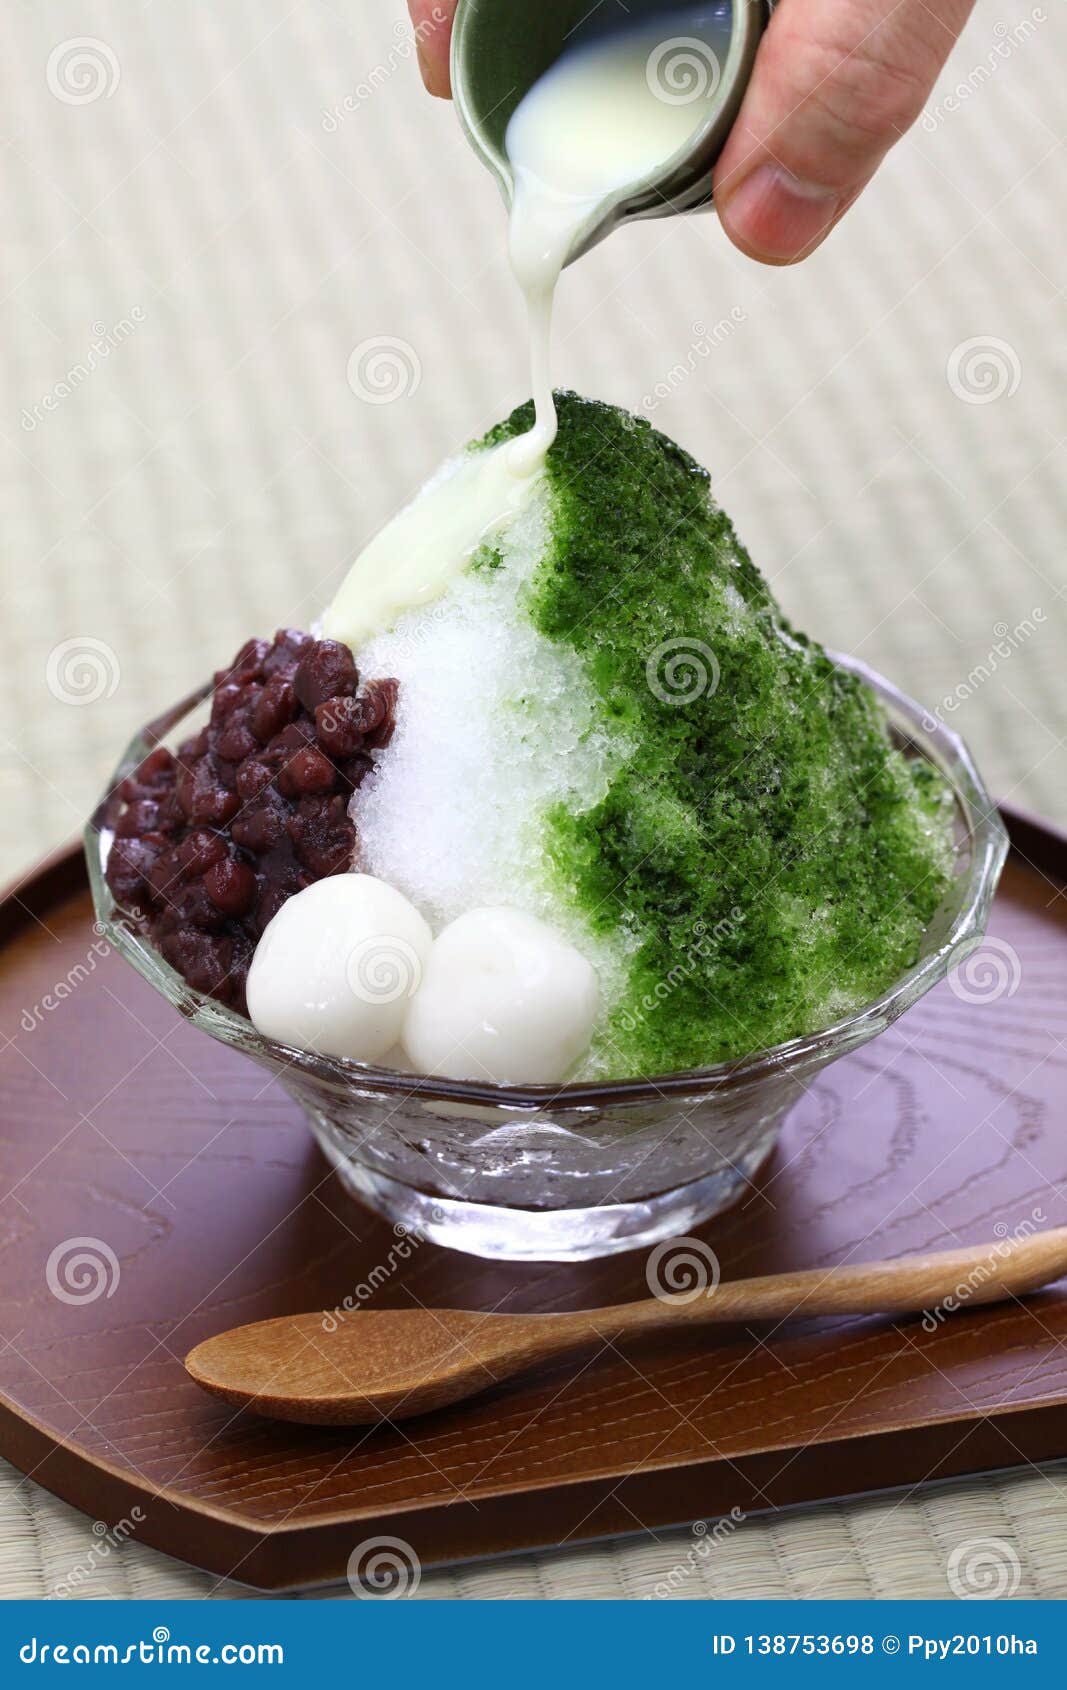 shaved ice with matcha green tea syrup and azuki red beans jam